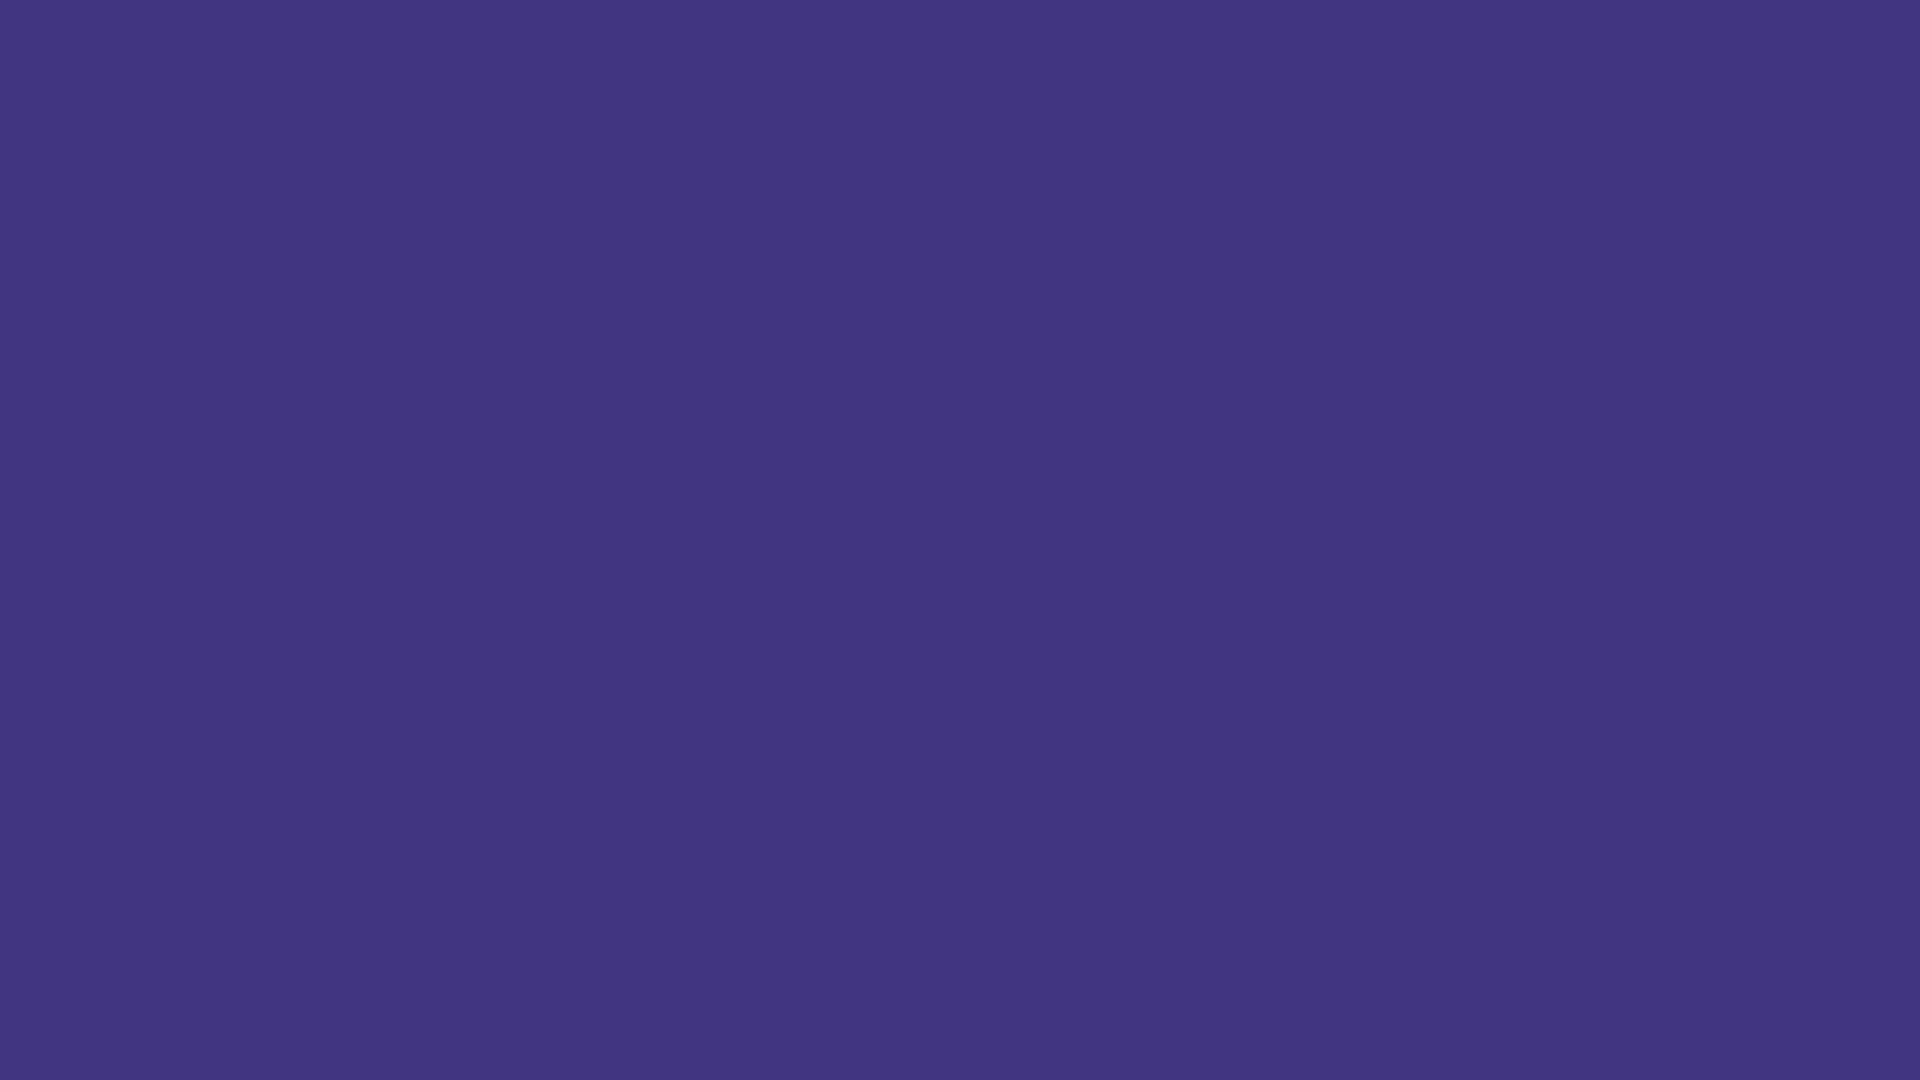 NCRP-branded purple background - 90 percent transparency.